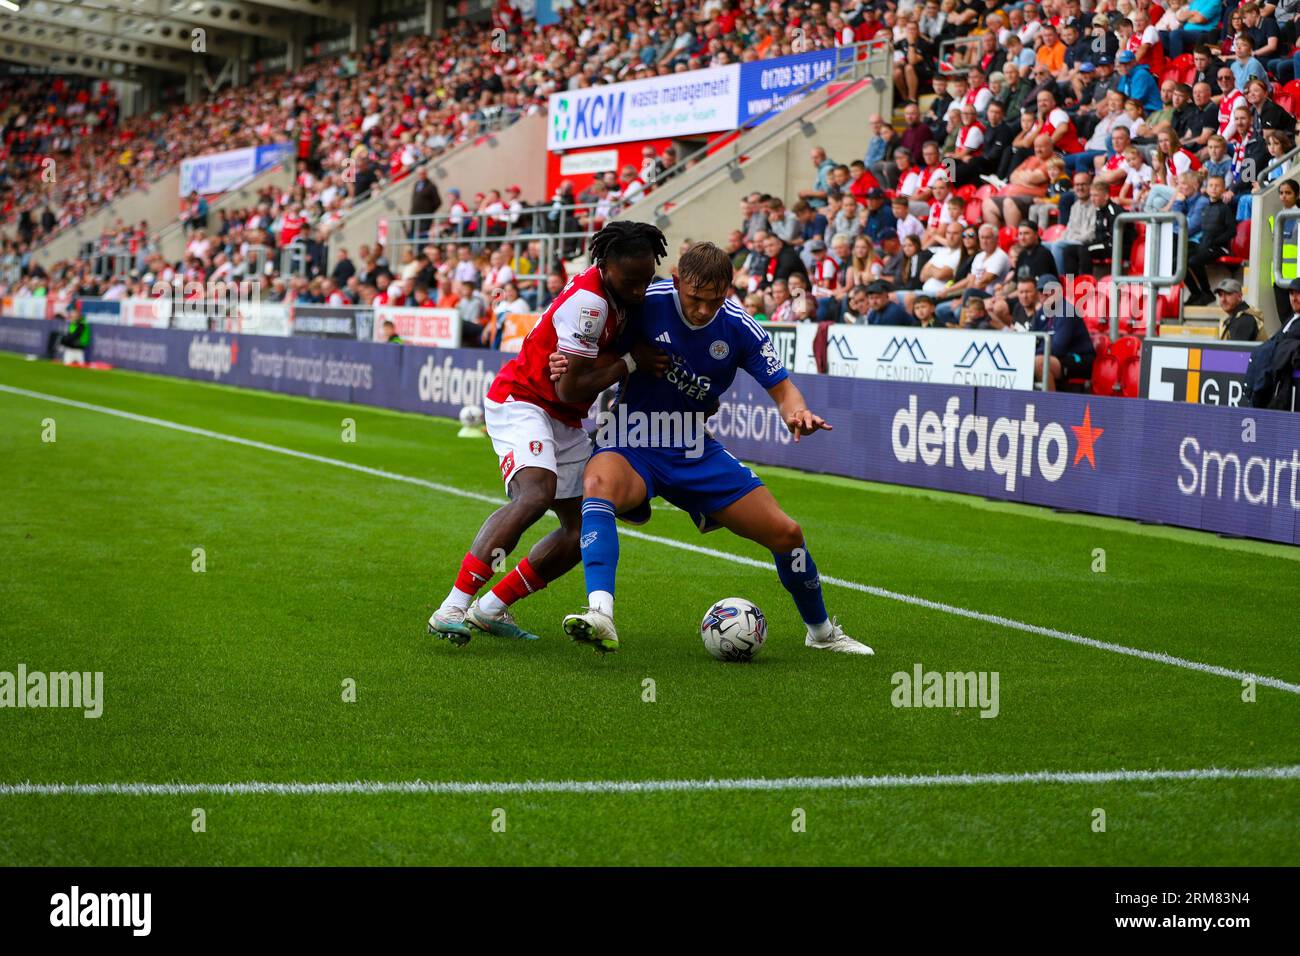 AESSEAL New York Stadium, Rotherham, England - 26th August 2023 Callum Doyle (5) of Leicester City shields the ball from Fred Onyedinma (14) of Rotherham United - during the game Rotherham United v Leicester City, Sky Bet Championship,  2023/24, AESSEAL New York Stadium, Rotherham, England - 26th August 2023 Credit: Mathew Marsden/WhiteRosePhotos/Alamy Live News Stock Photo